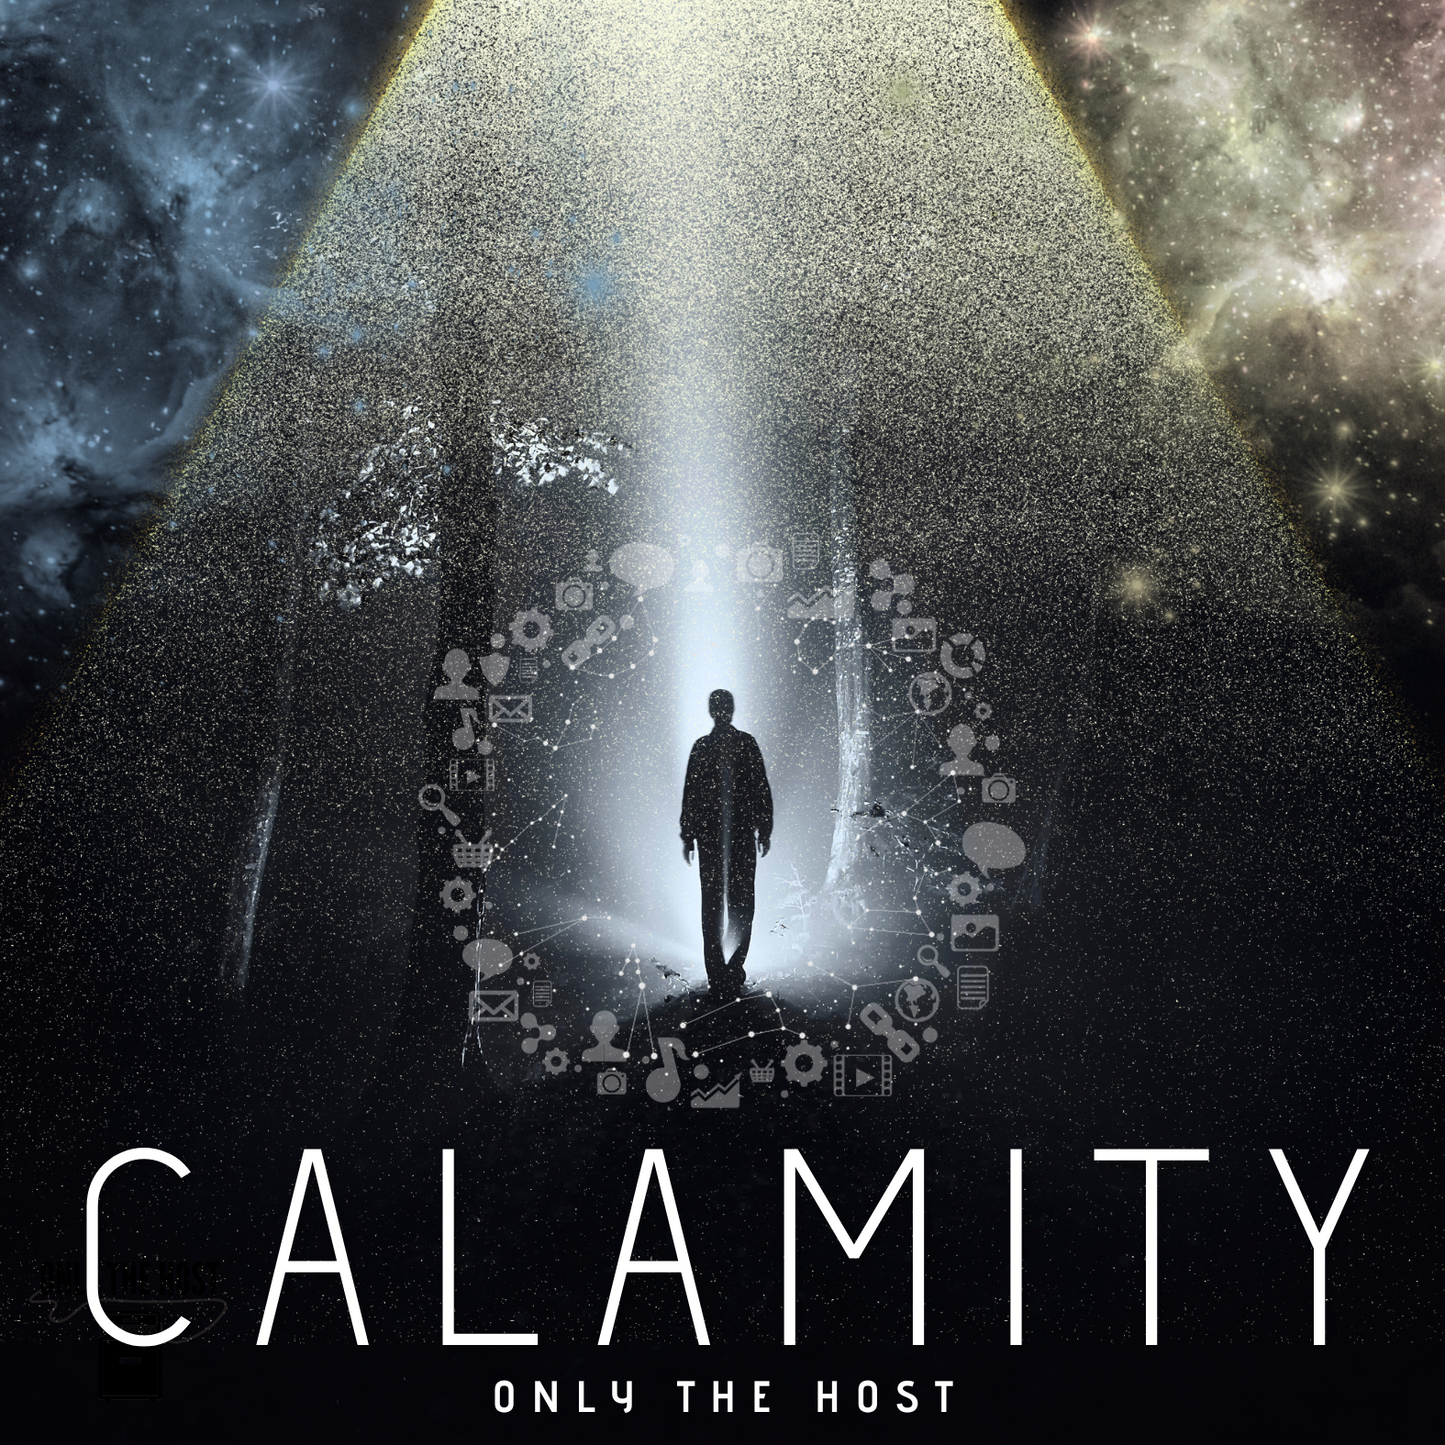 Only the Host - Calamity (Digital Download)